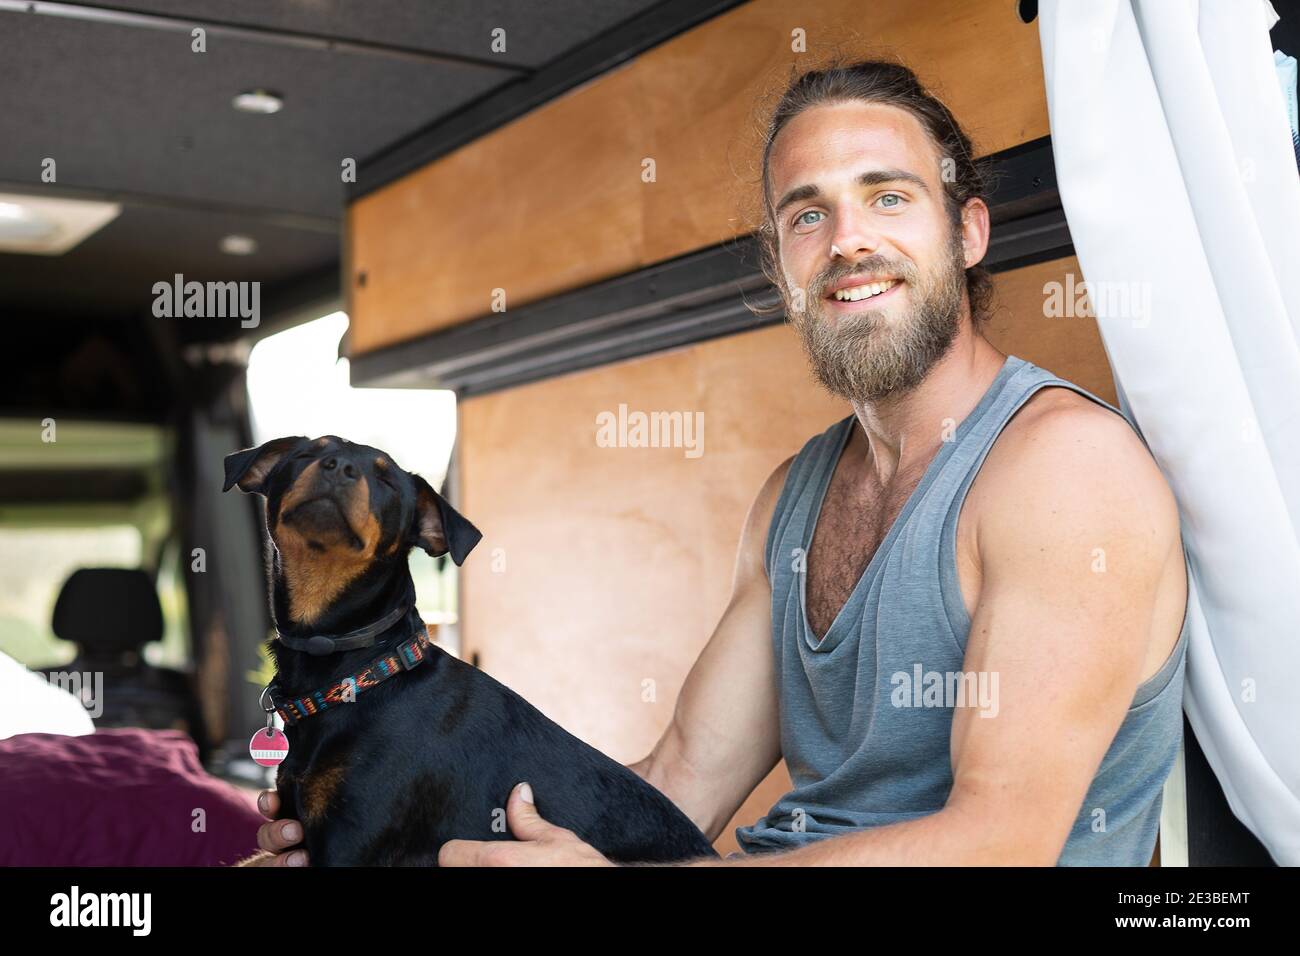 Man and his dog inside a camper van Stock Photo